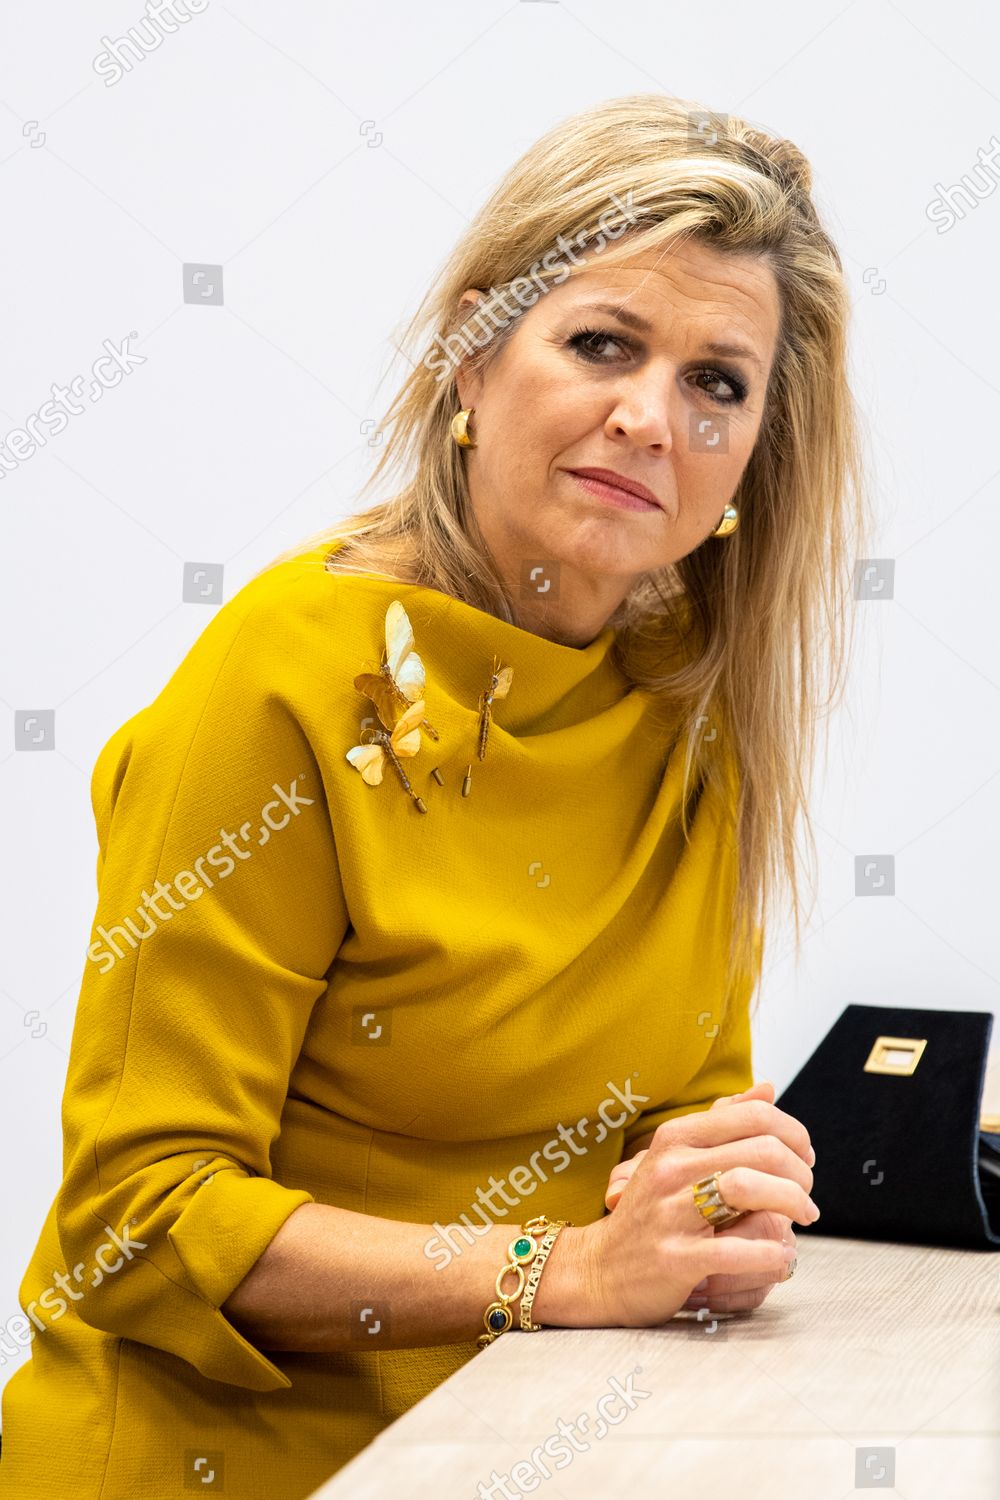 queen-maxima-visits-a-residential-care-location-noordwijk-the-netherlands-shutterstock-editorial-11014774r.jpg